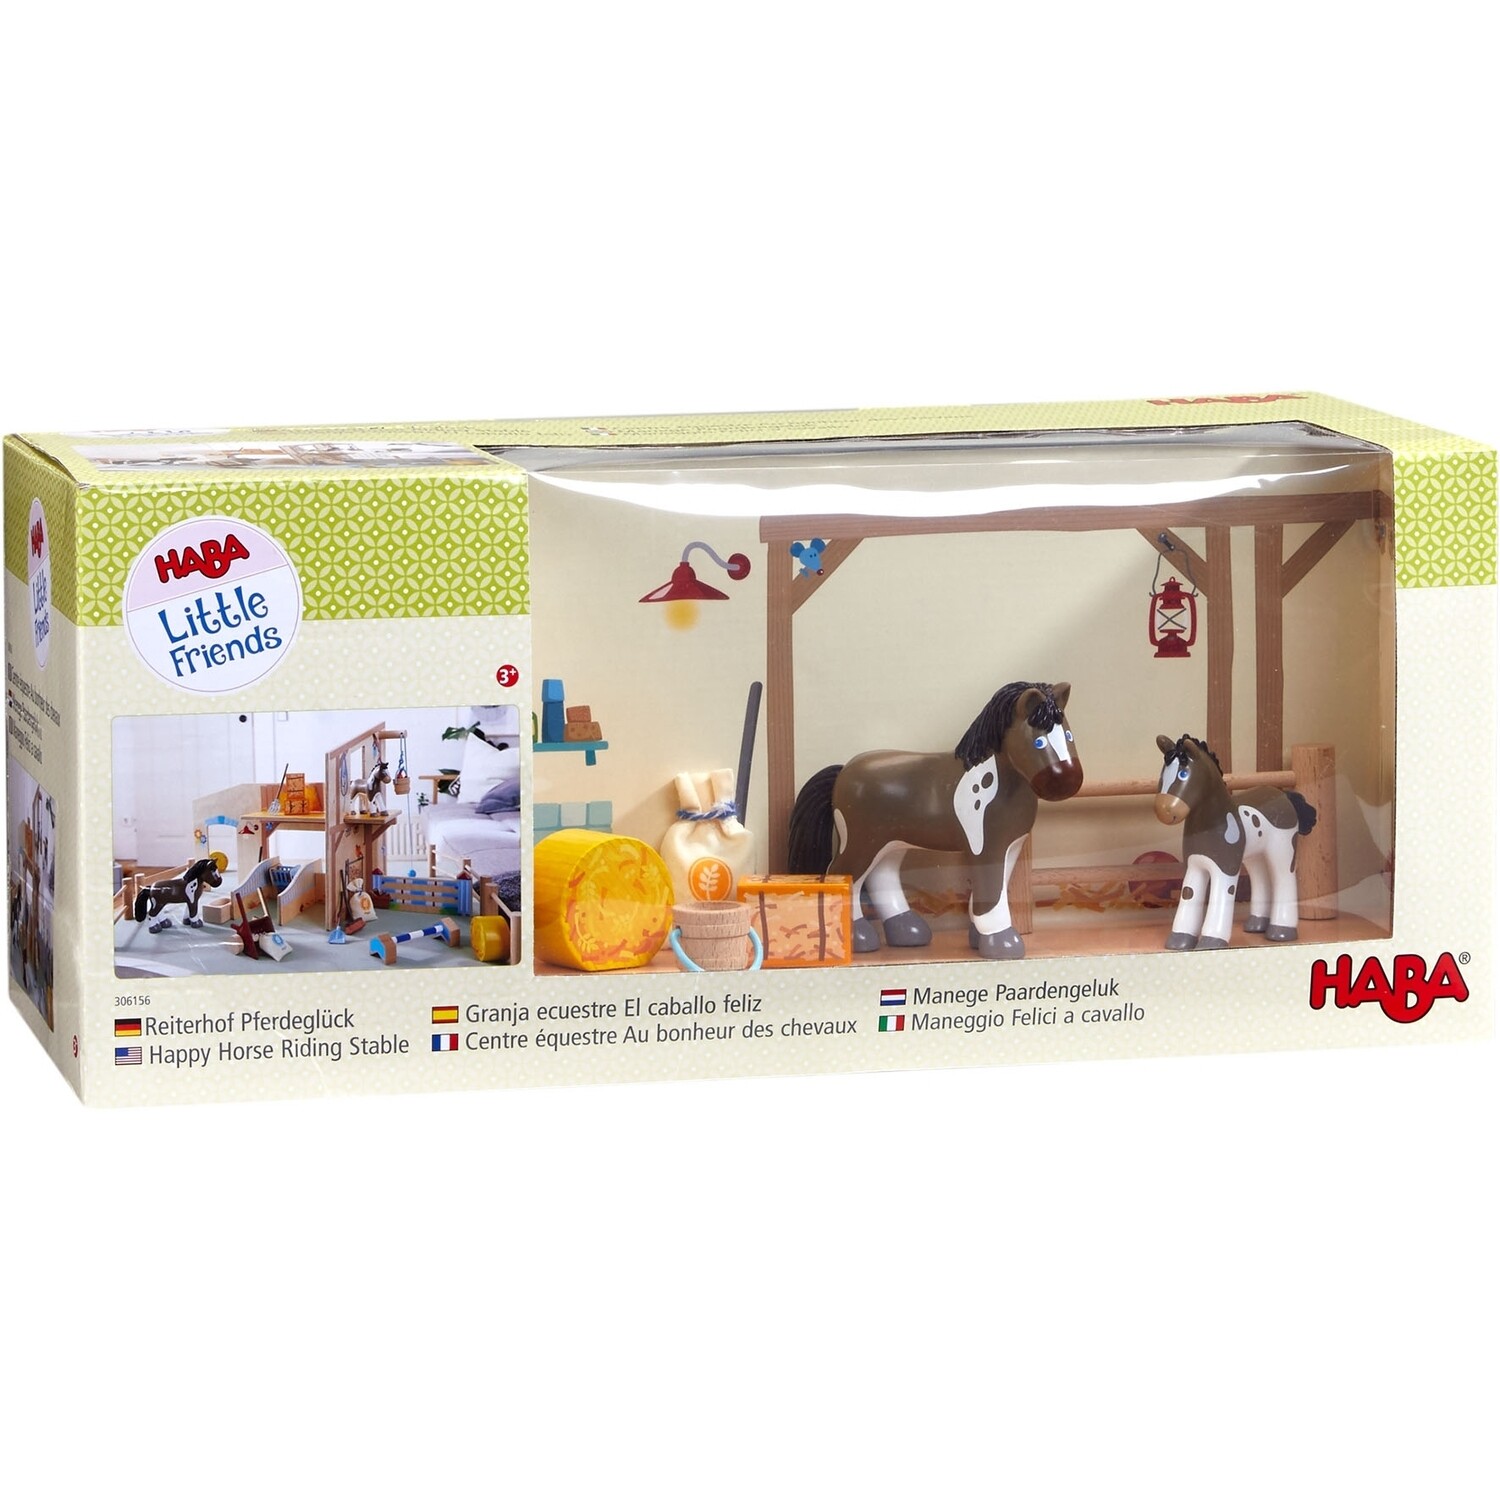 Haba Little Friends -Happy Hour Riding Stable